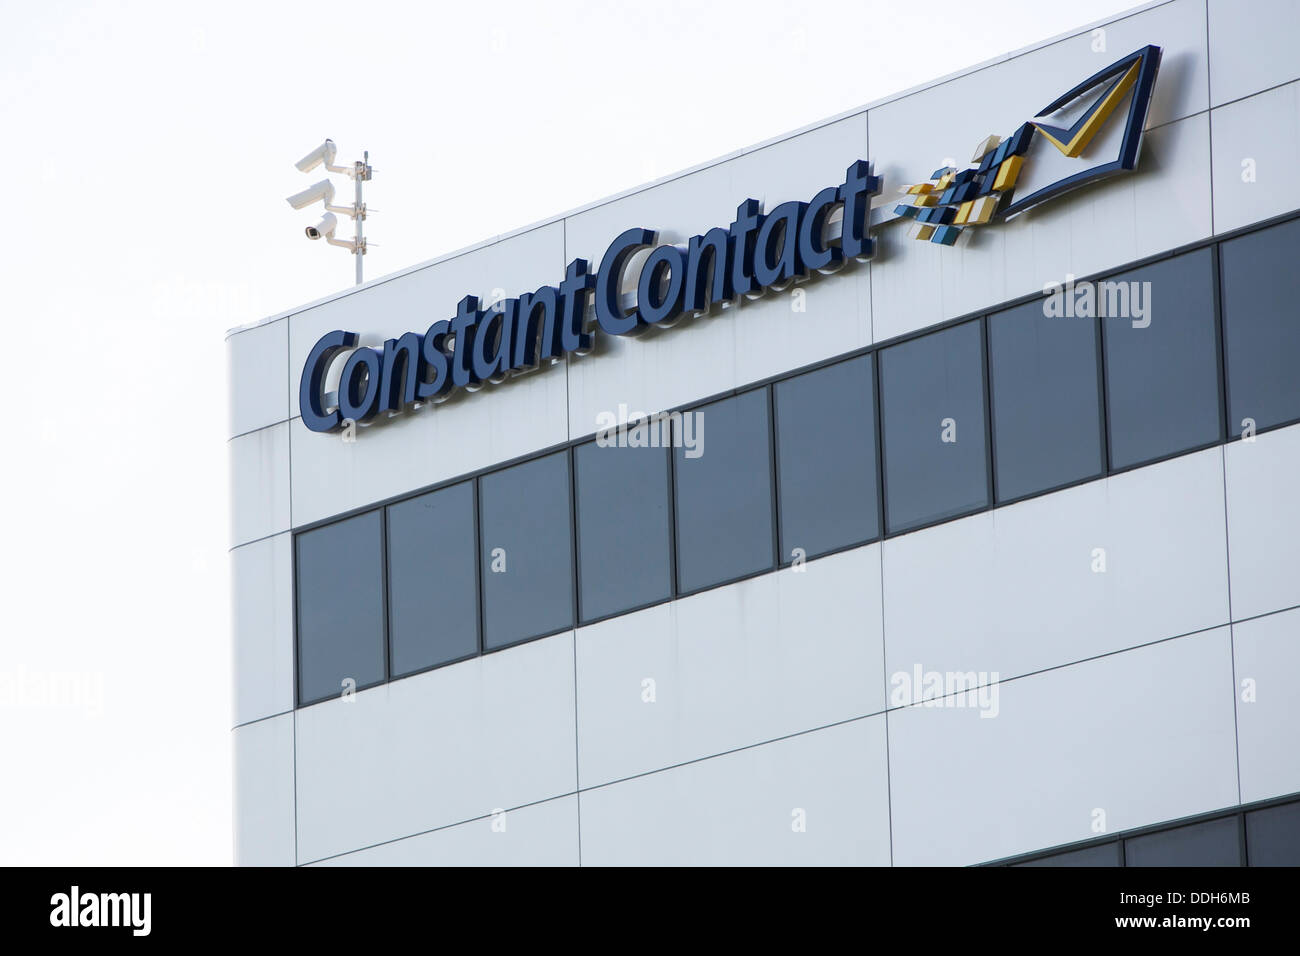 The headquarters of online marketing firm Constant Contact.  Stock Photo